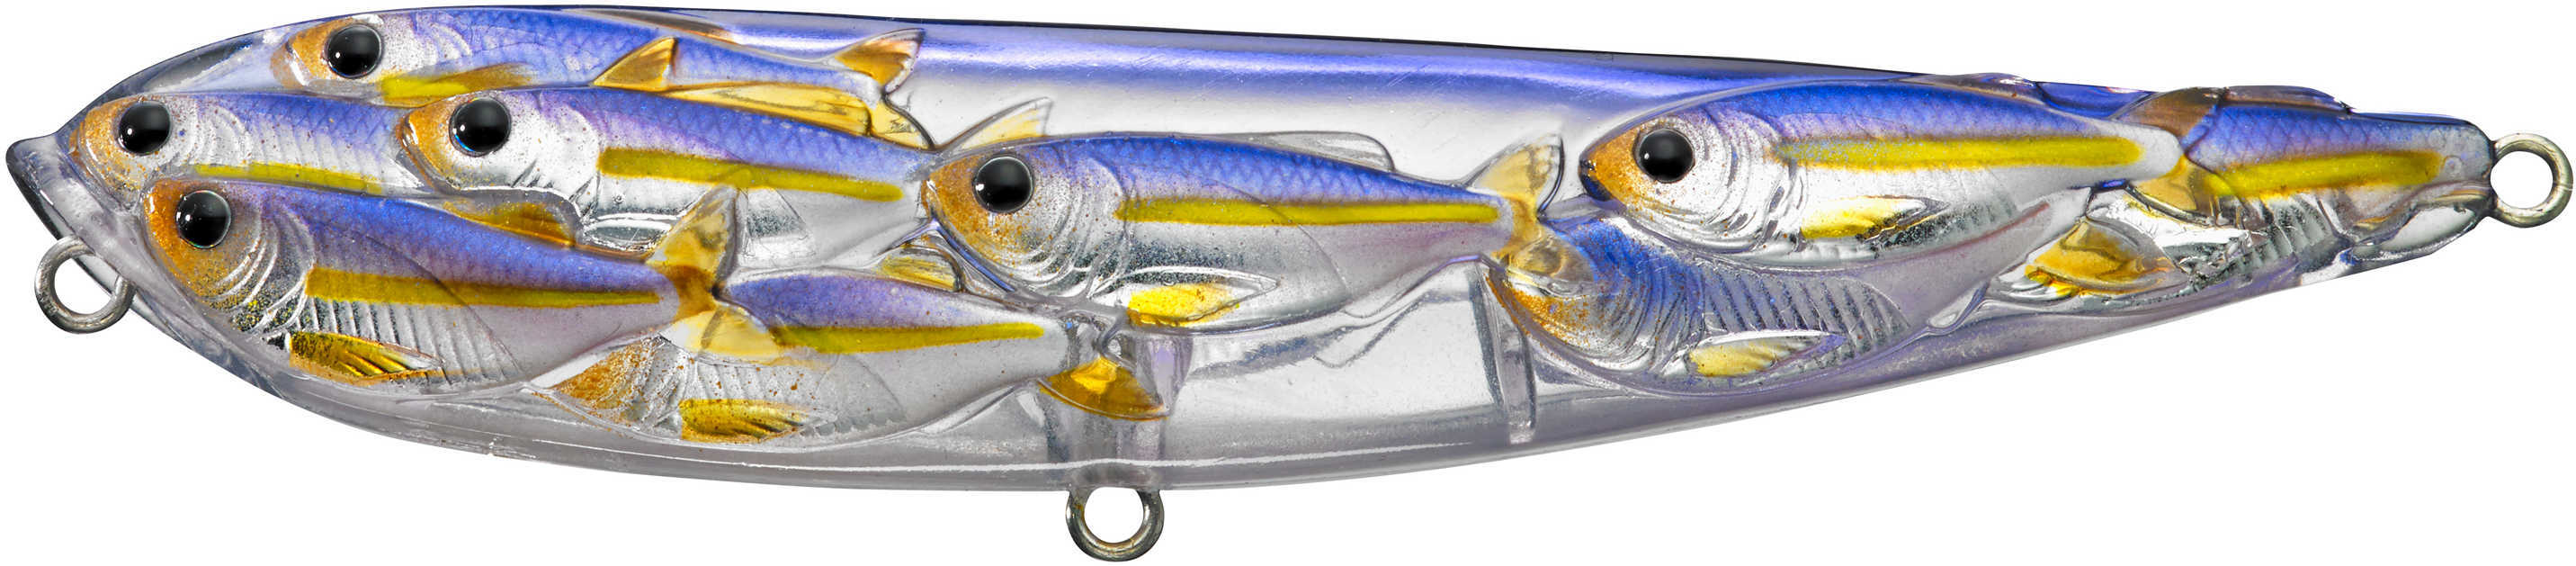 LIVETARGET Lures / Koppers Fishing and Tackle Corp Yearling Baitball Walking Pearl/Violet Shad #4 Md: YWB115T812